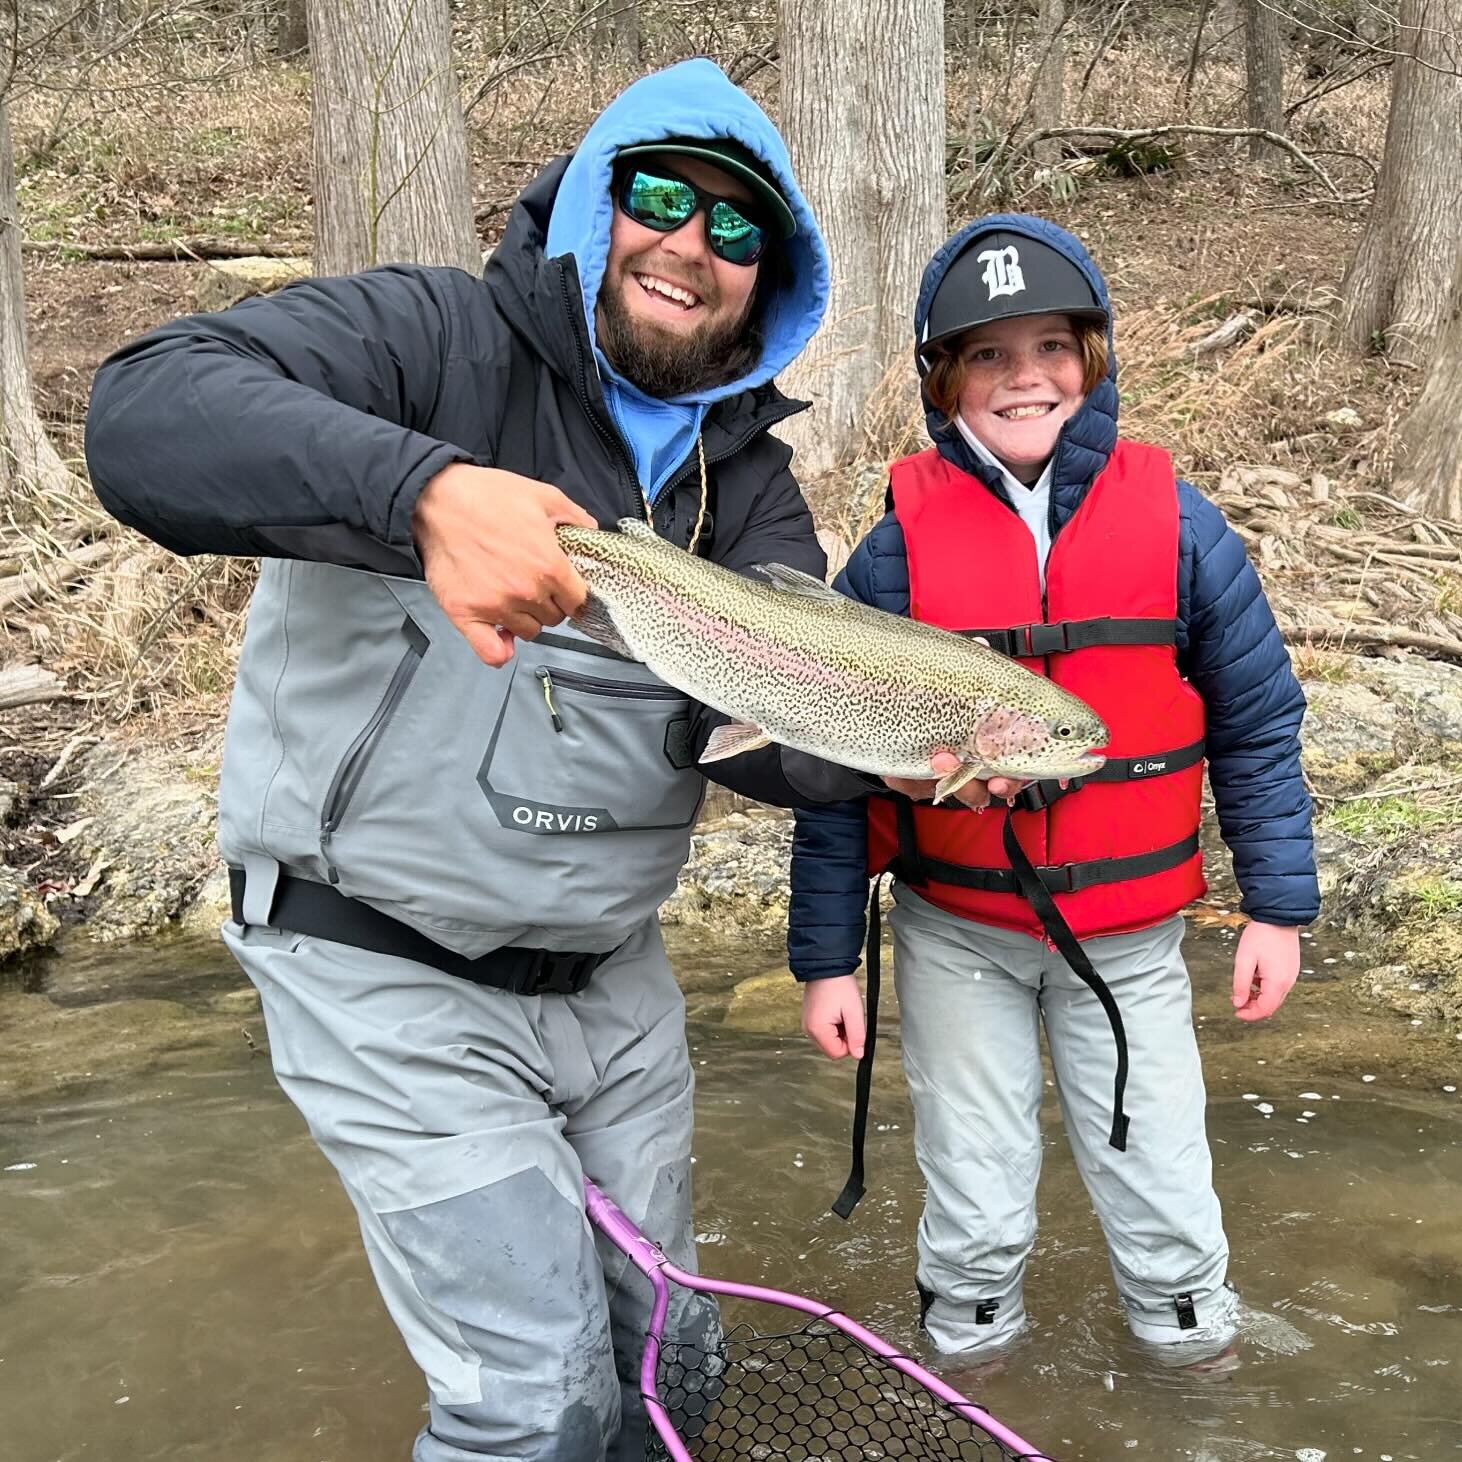 We do our best to accommodate anglers of all ages and skill levels. Spring break is just around the corner and would make an awesome family vacation experience.